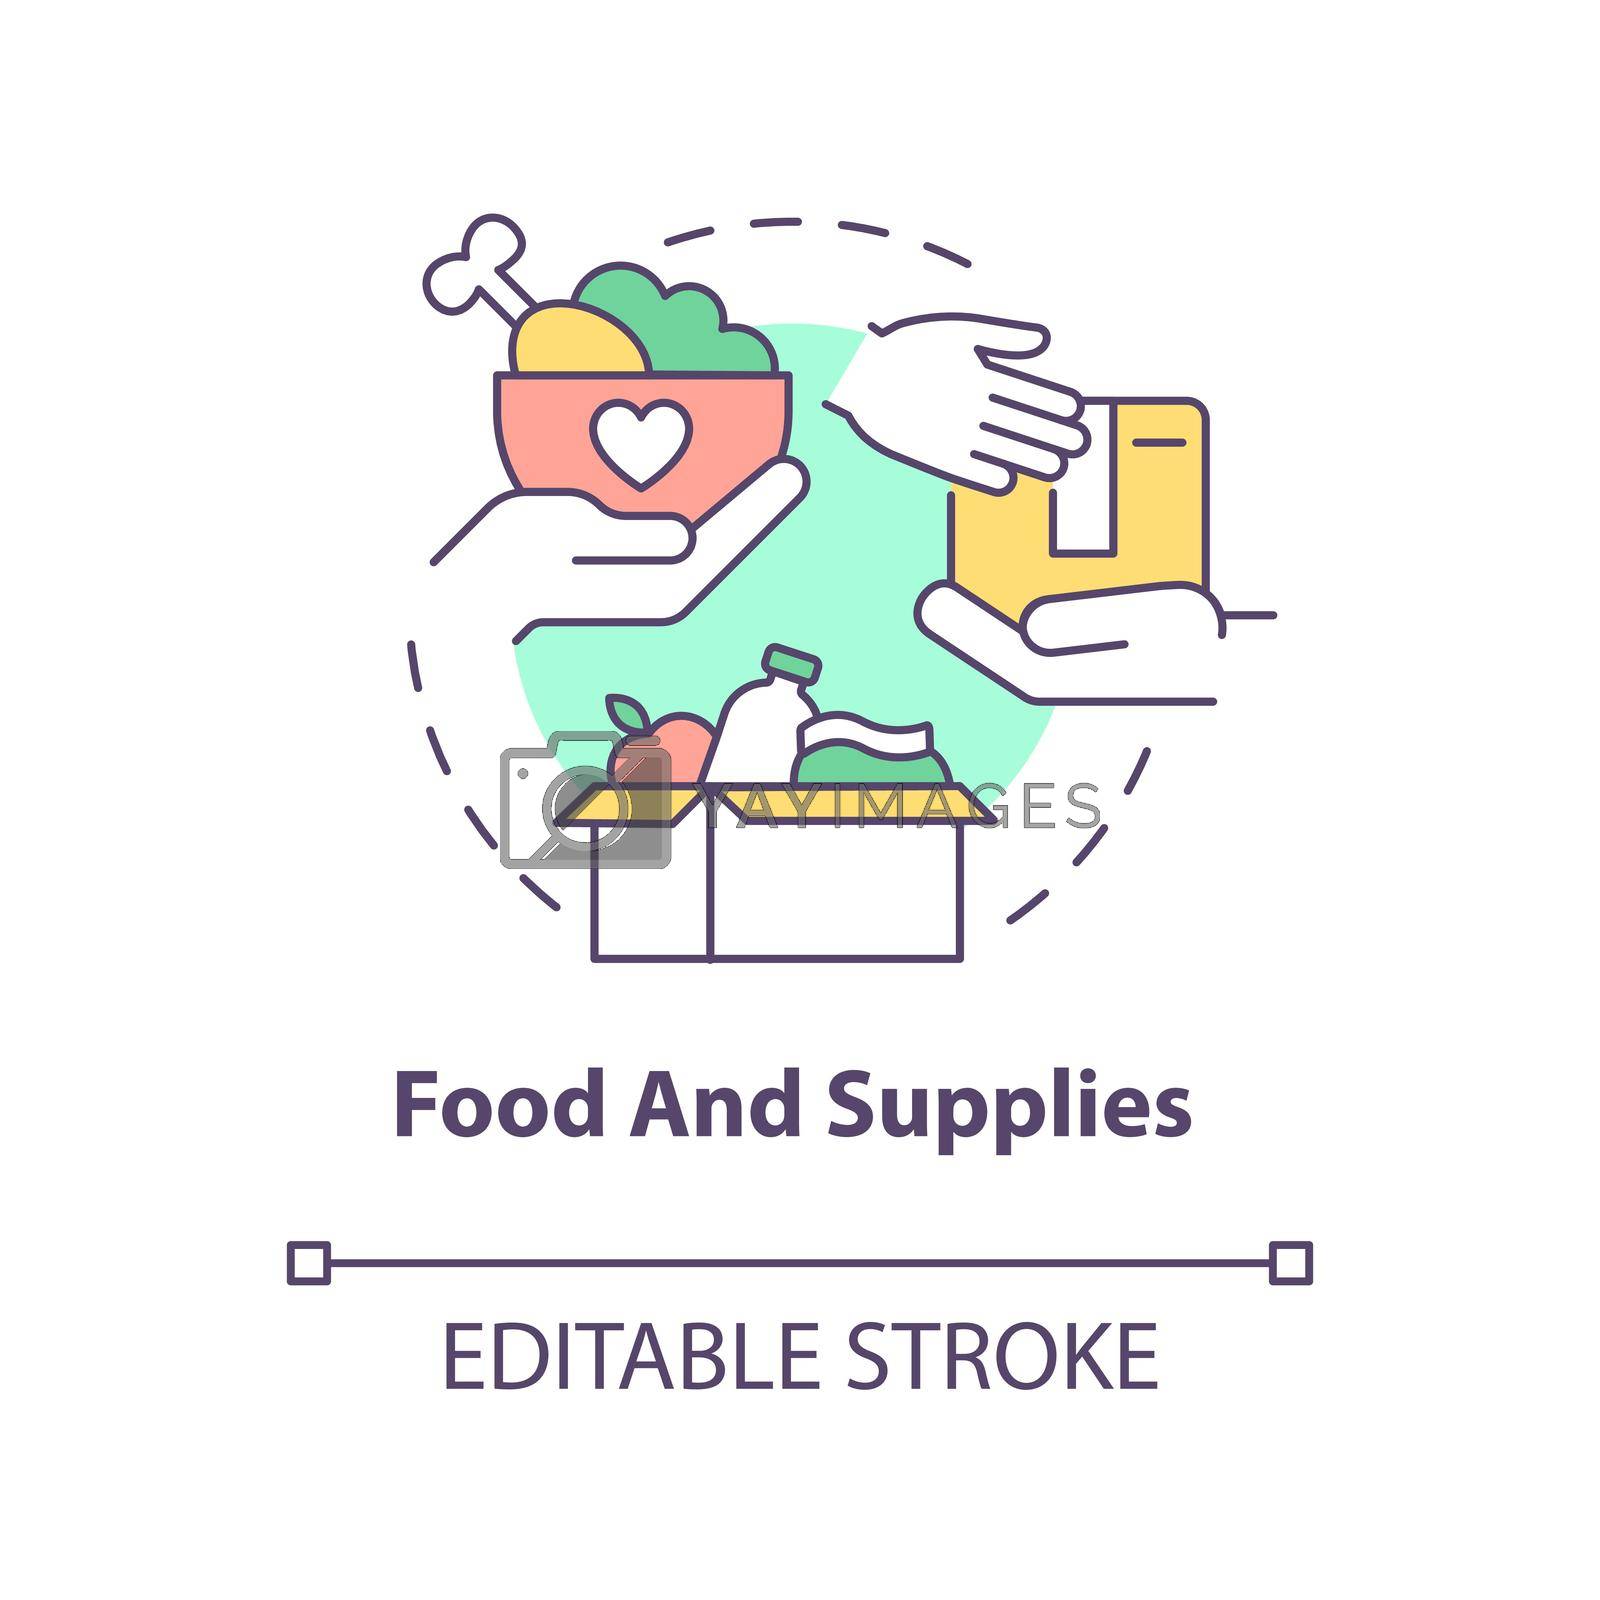 Royalty free image of Food and supplies concept icon by bsd